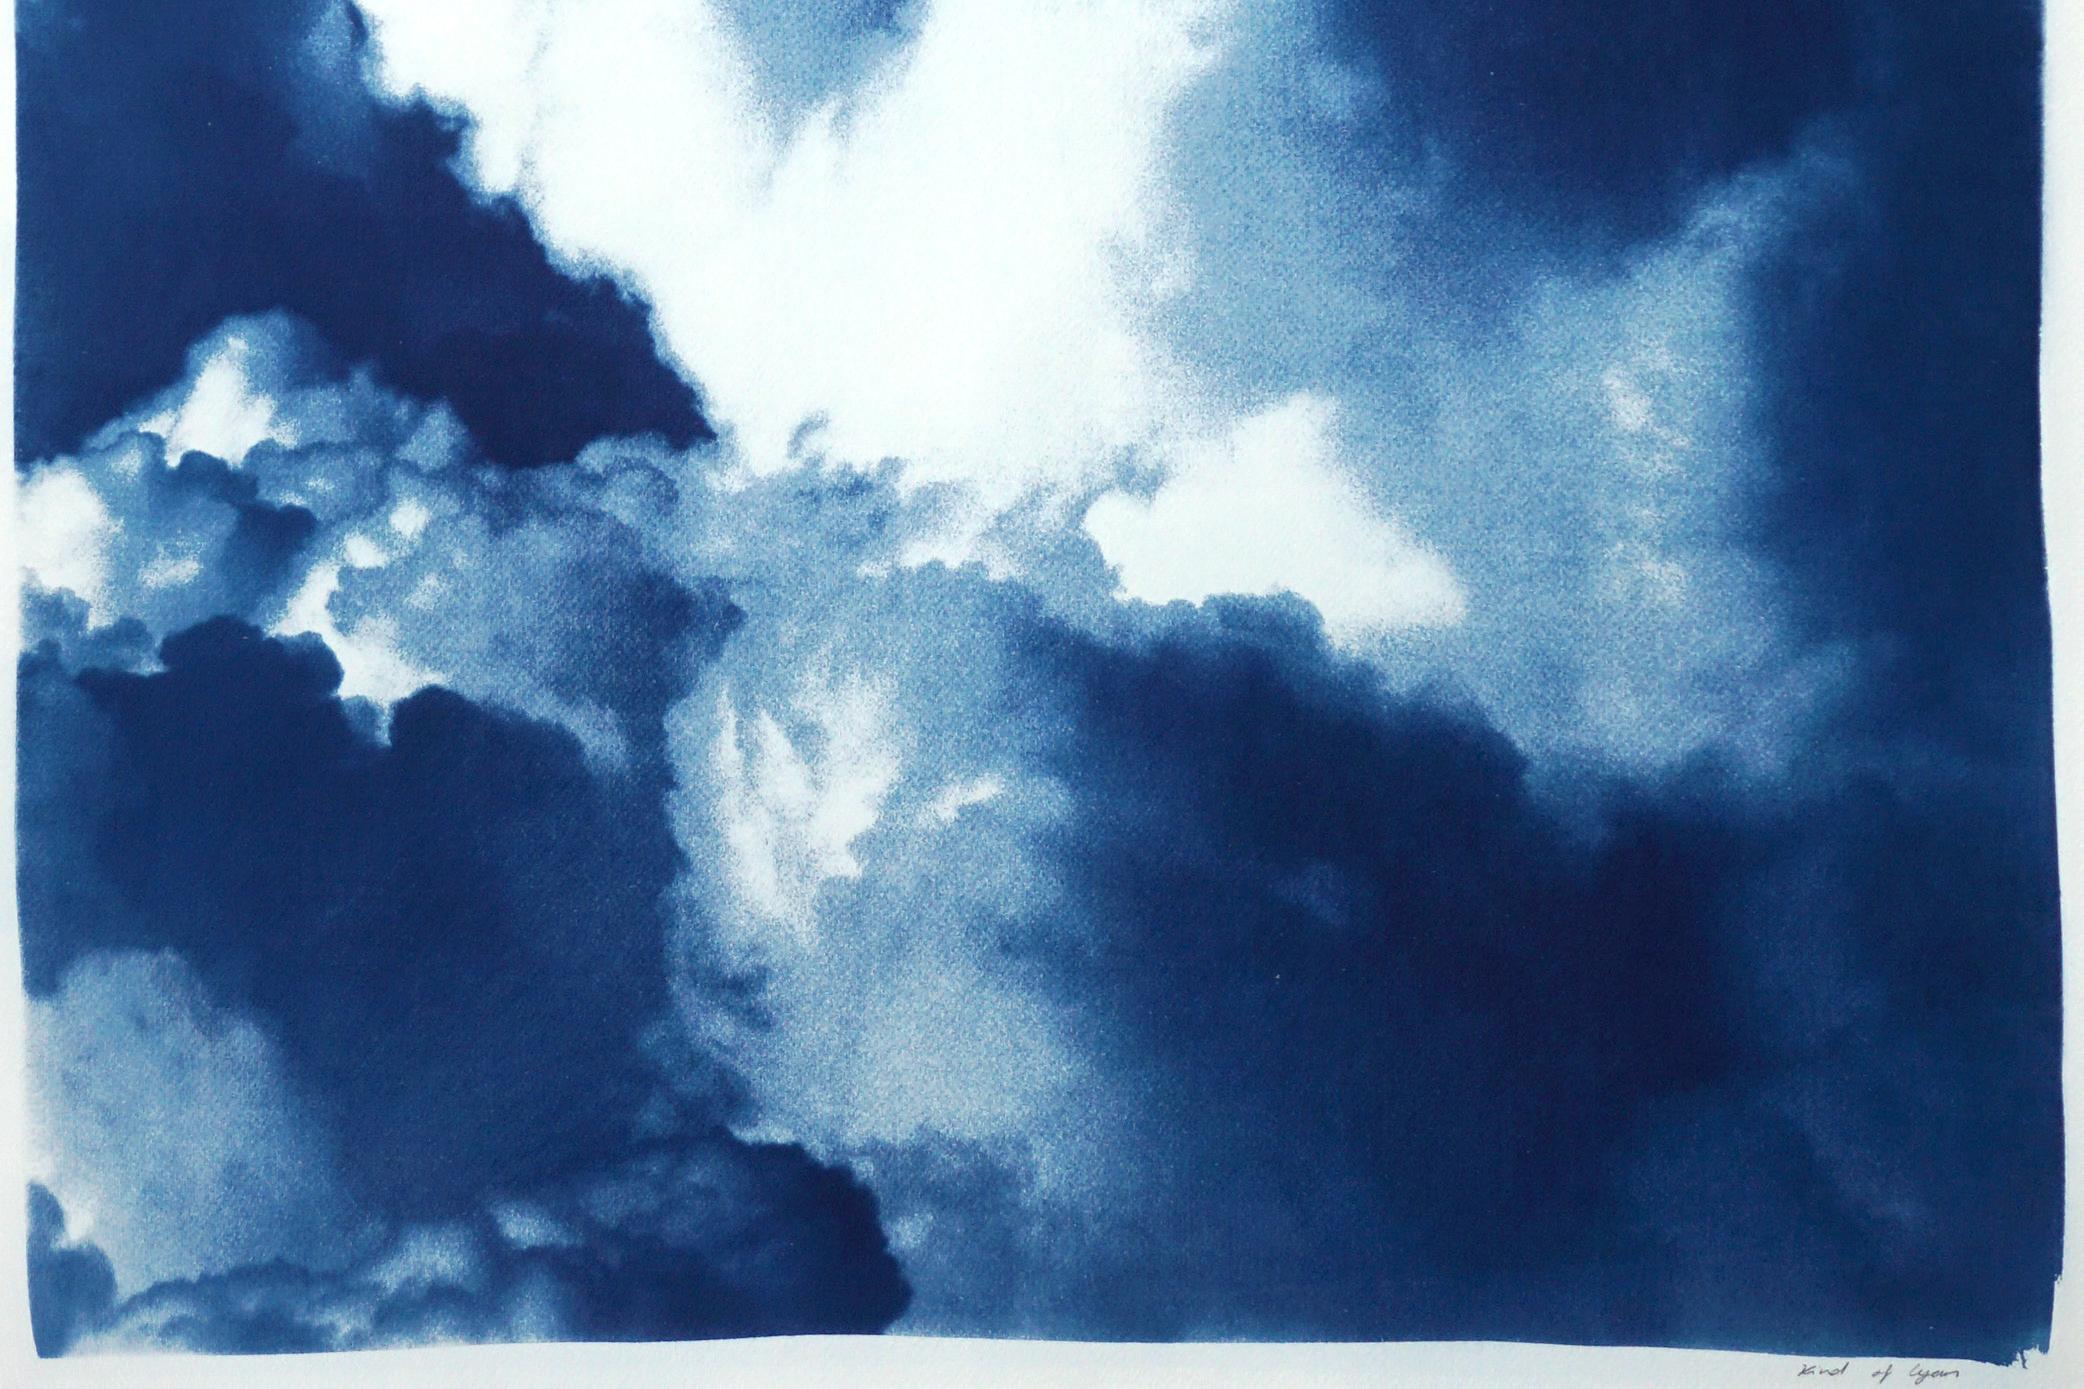 This is an exclusive handprinted limited edition cyanotype print. 
This beautiful triptych shows a dense gorgeous cloud traveling through the sky.  

Details:
+ Title: Looking Into The Clouds
+ Year: 2021
+ Edition Size: 100
+ Stamped and